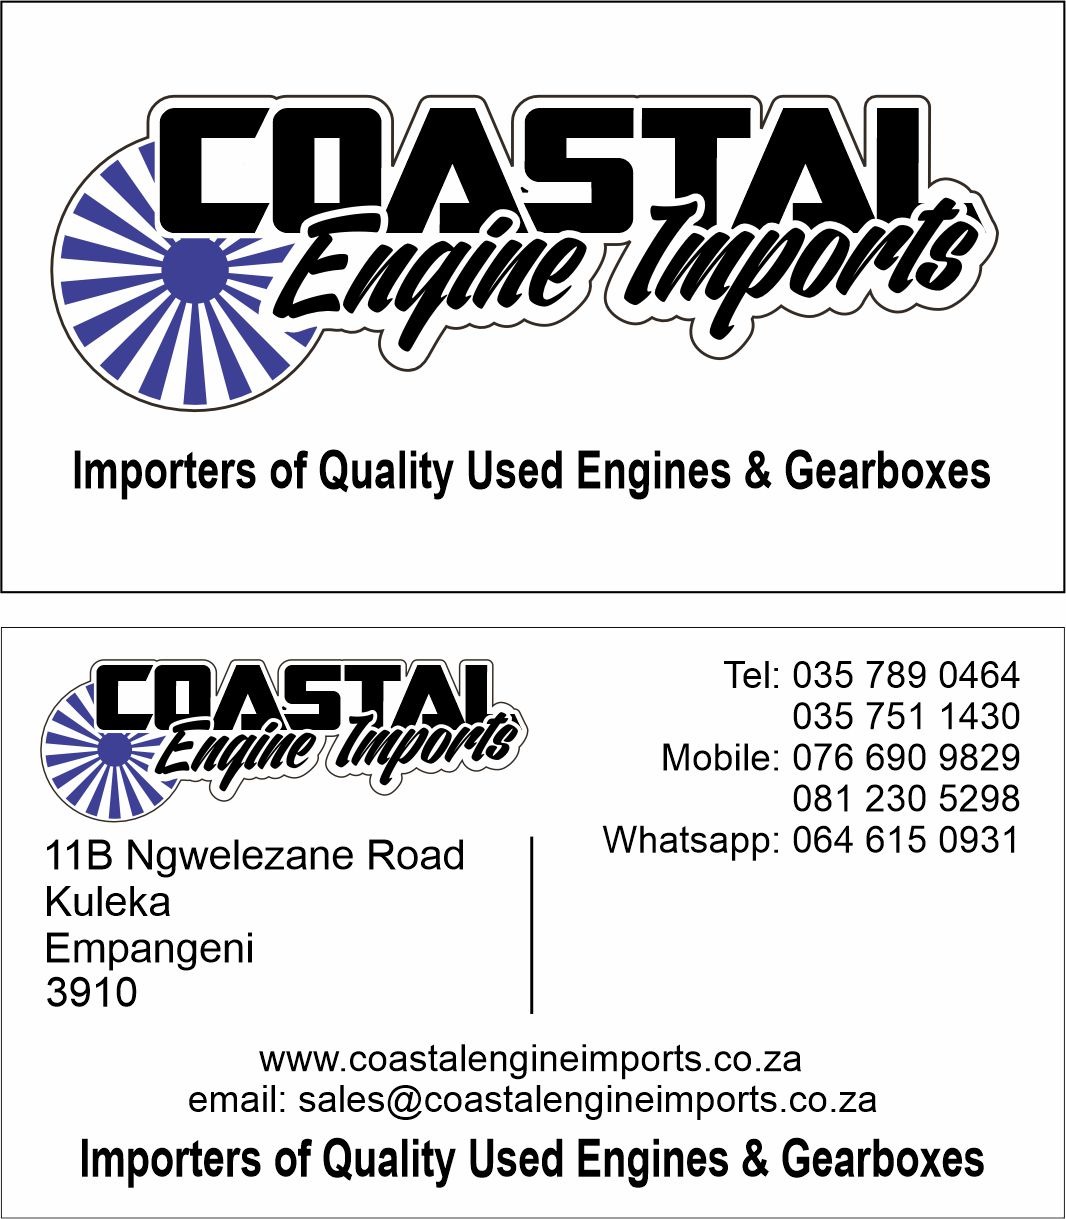 Find Coastal Engine Imports's adverts listed on Junk Mail